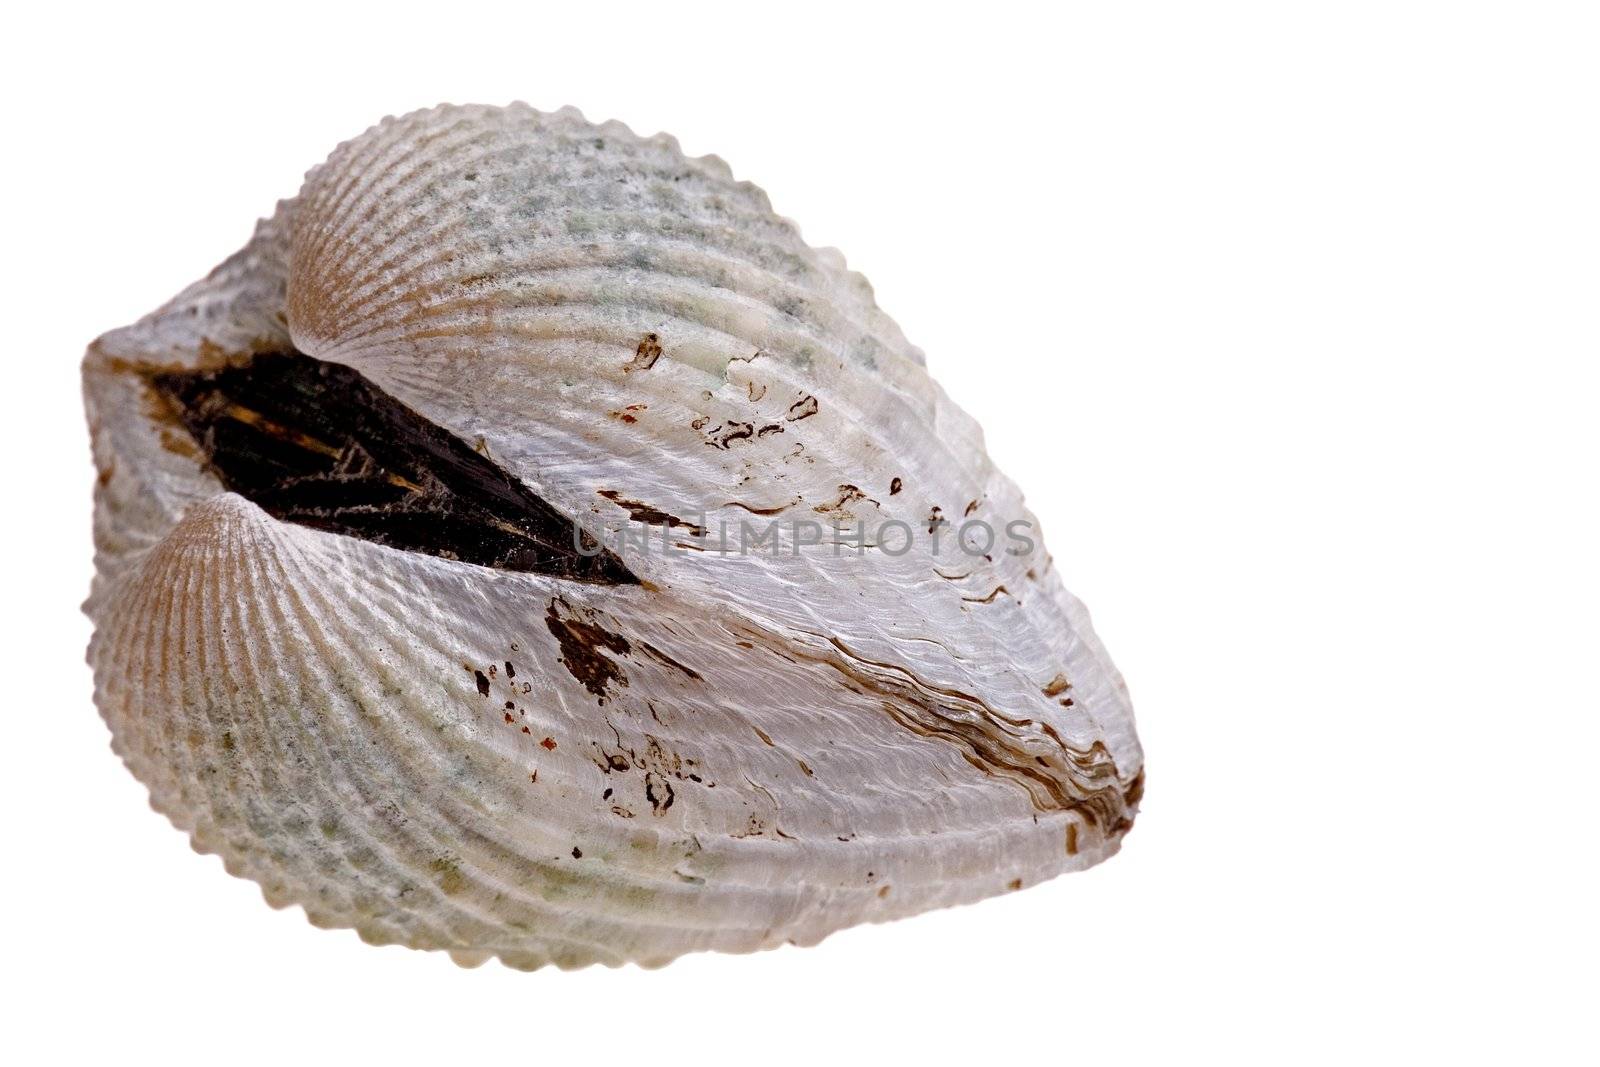 Isolated macro image of a fresh cockle.